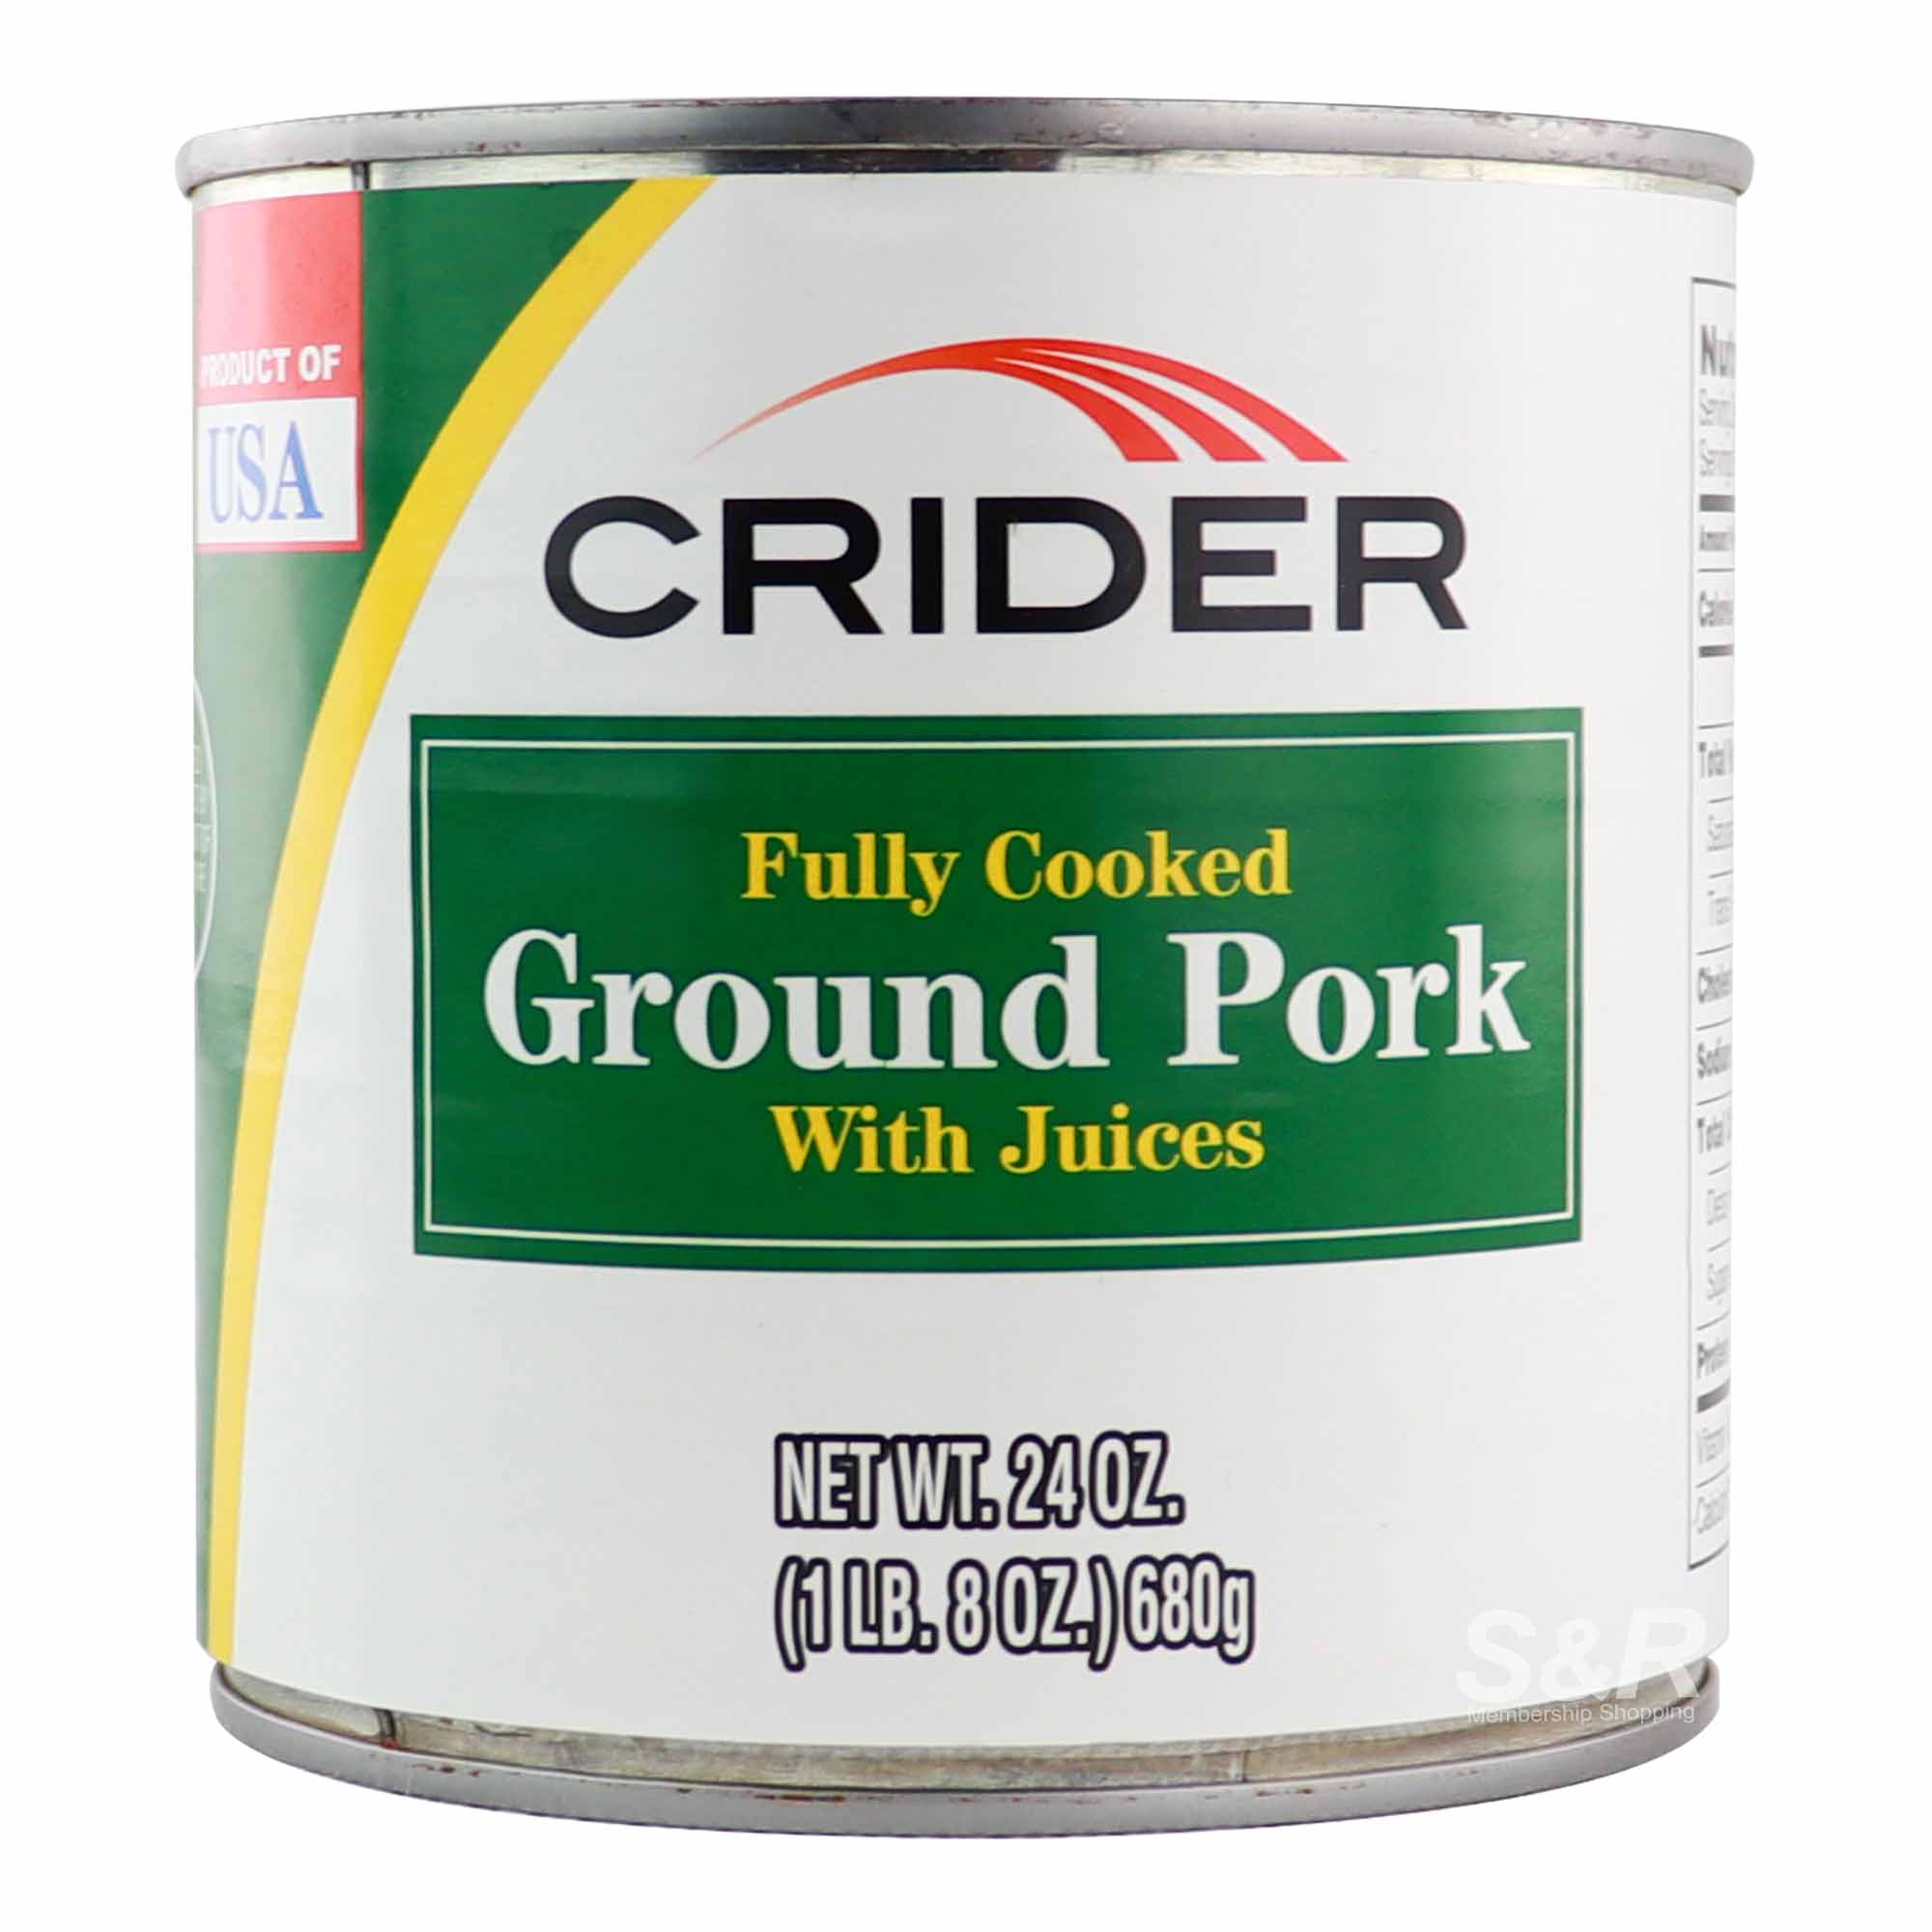 Crider Fully Cooked Ground Pork With Juices 680g